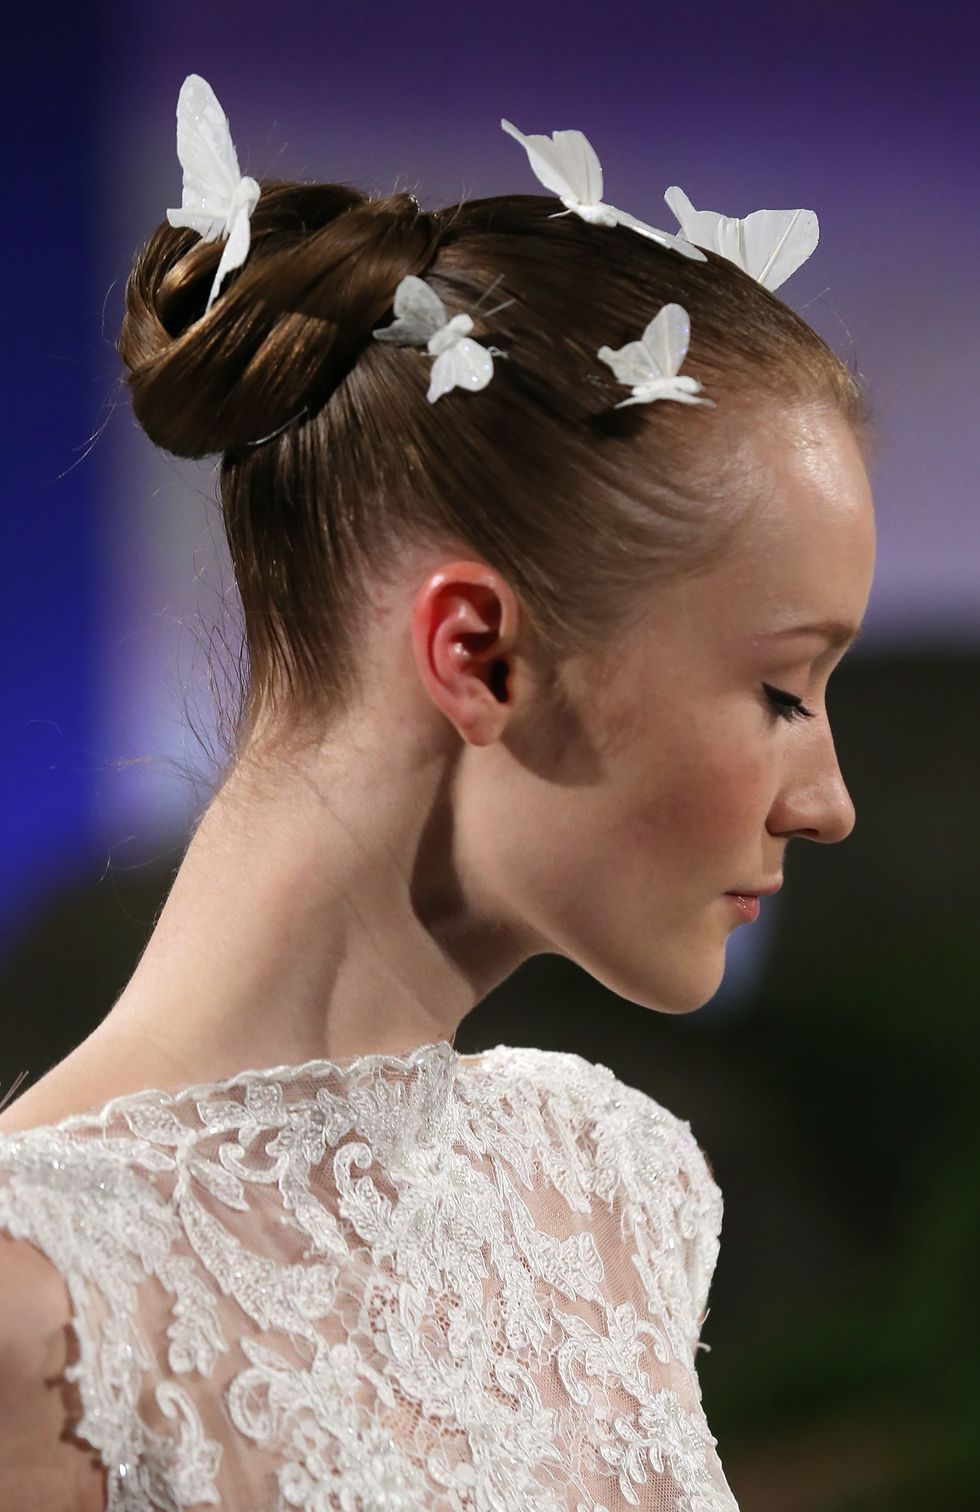 Beautiful hairstyles from Bridal Fashion Week